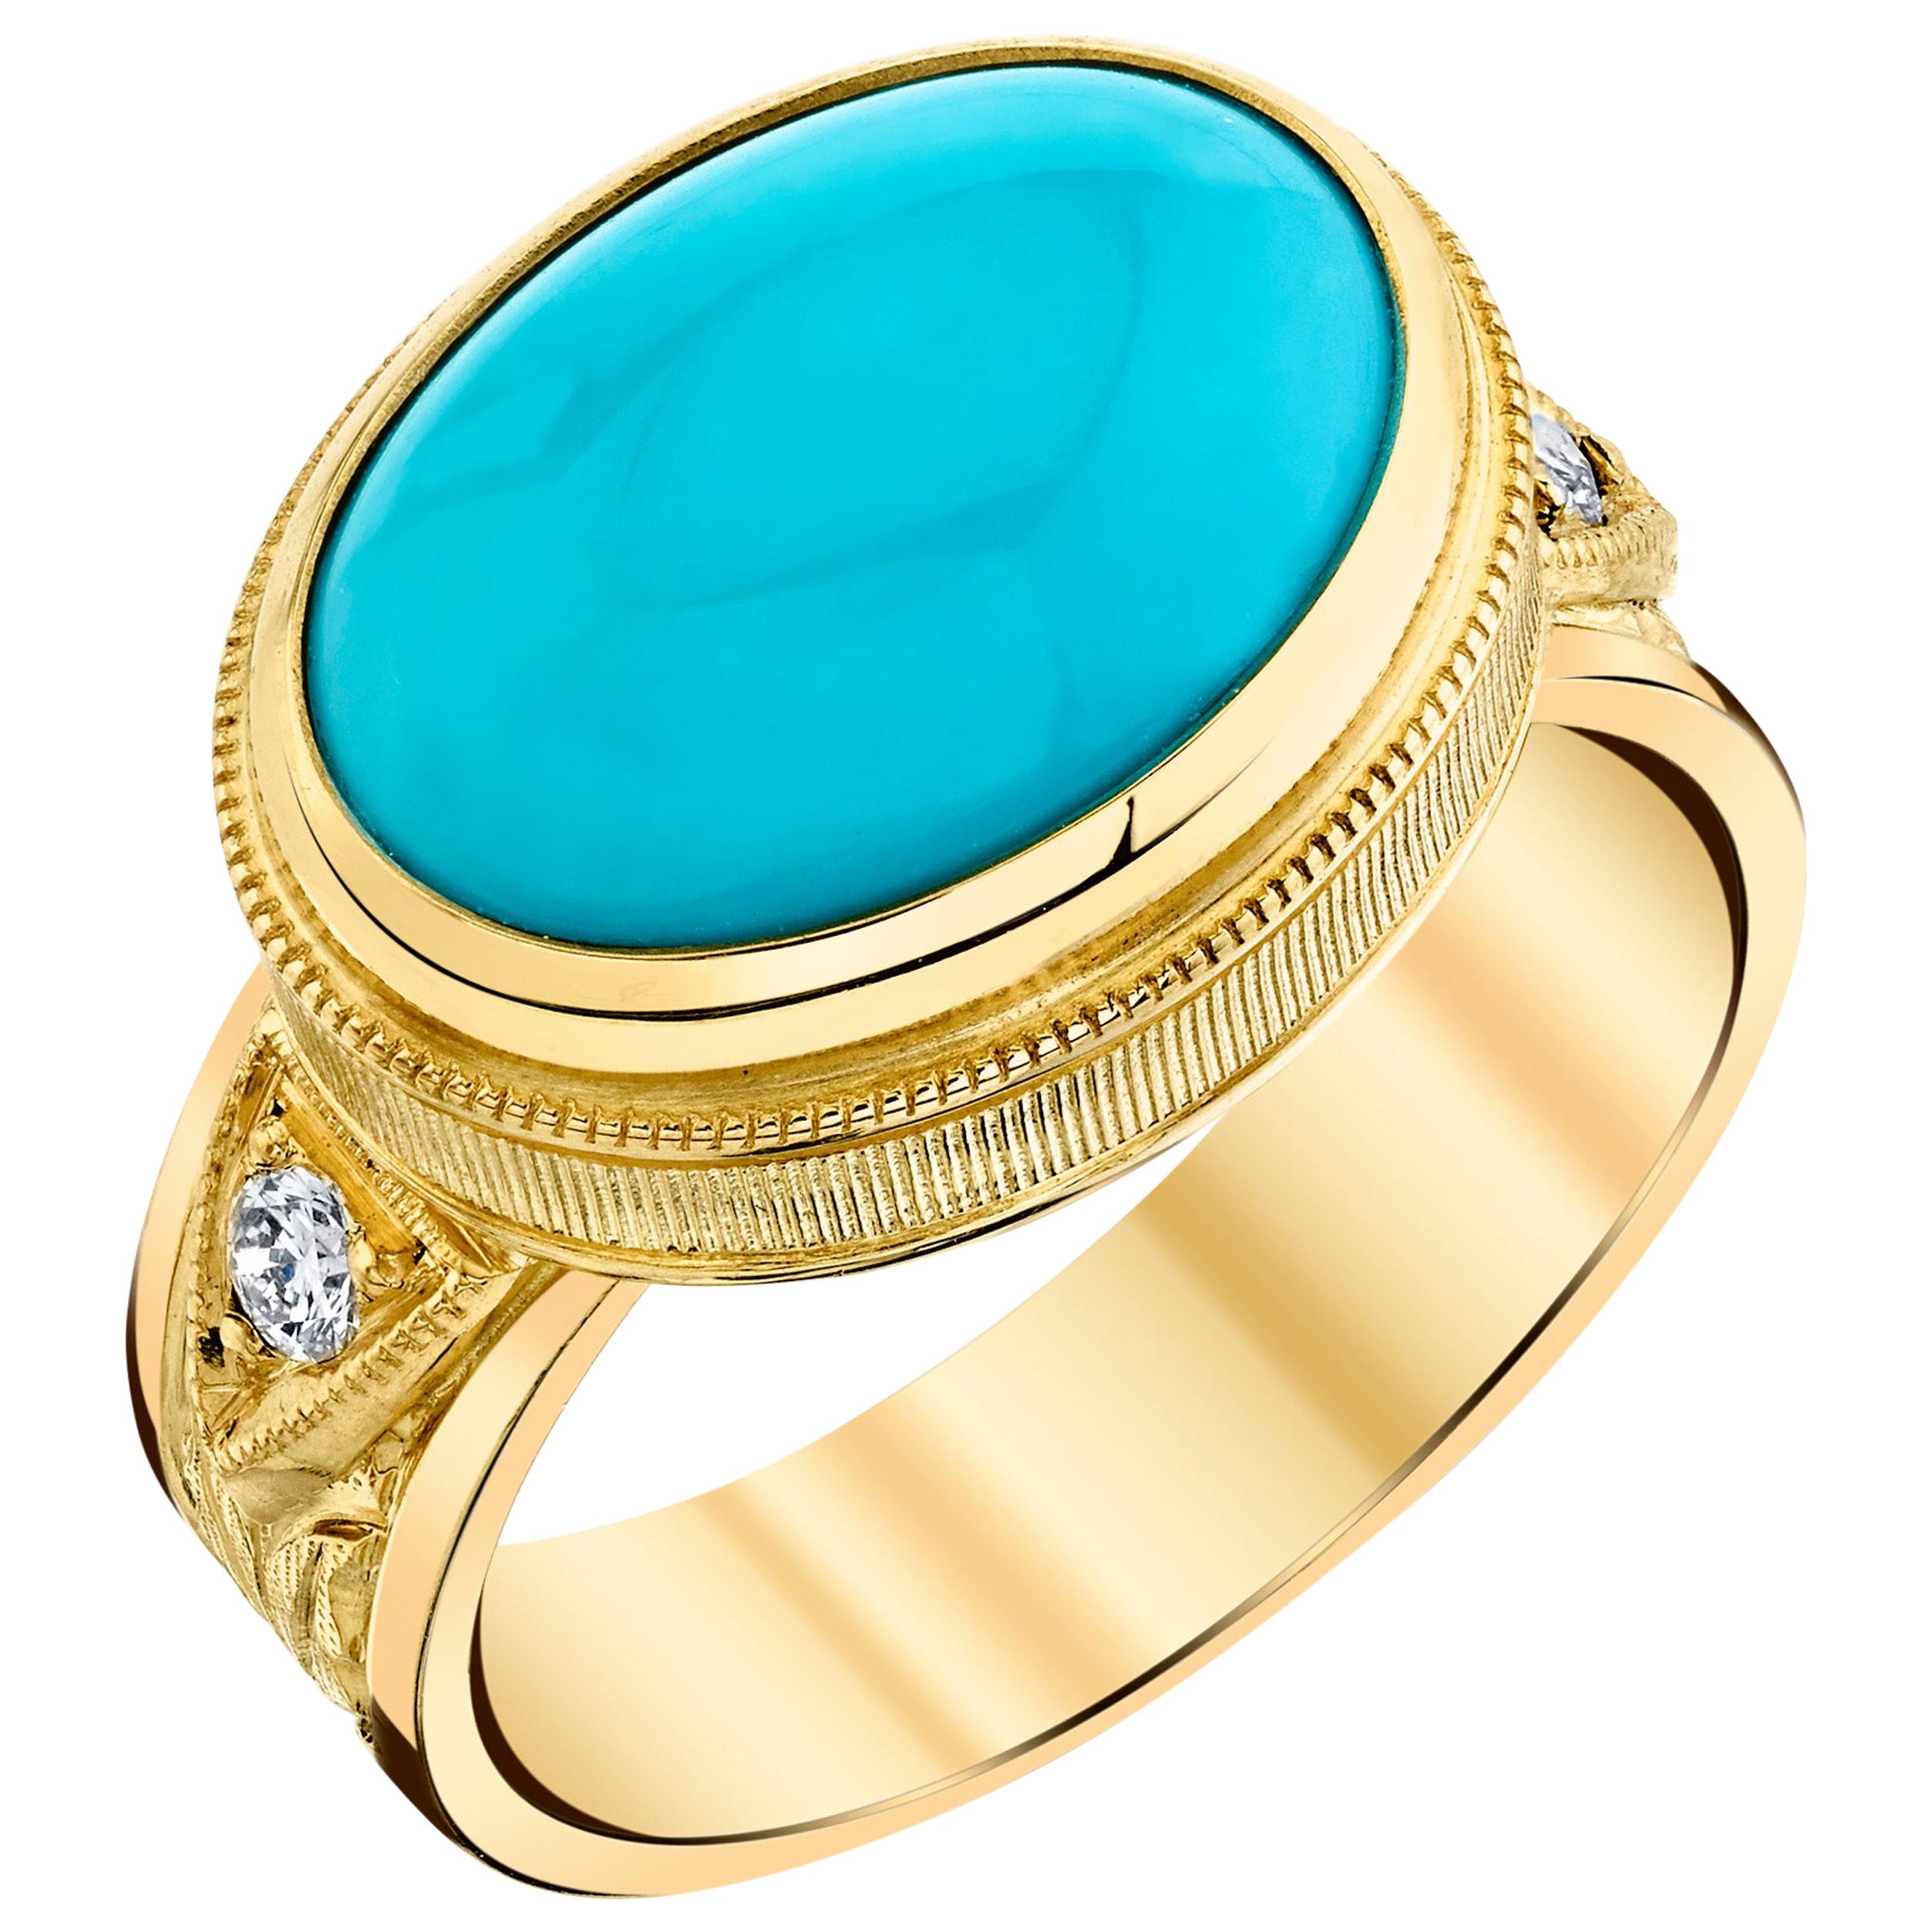 4.68 ct. Sleeping Beauty Turquoise Cabochon & Diamond 18k Yellow Gold Dome Ring